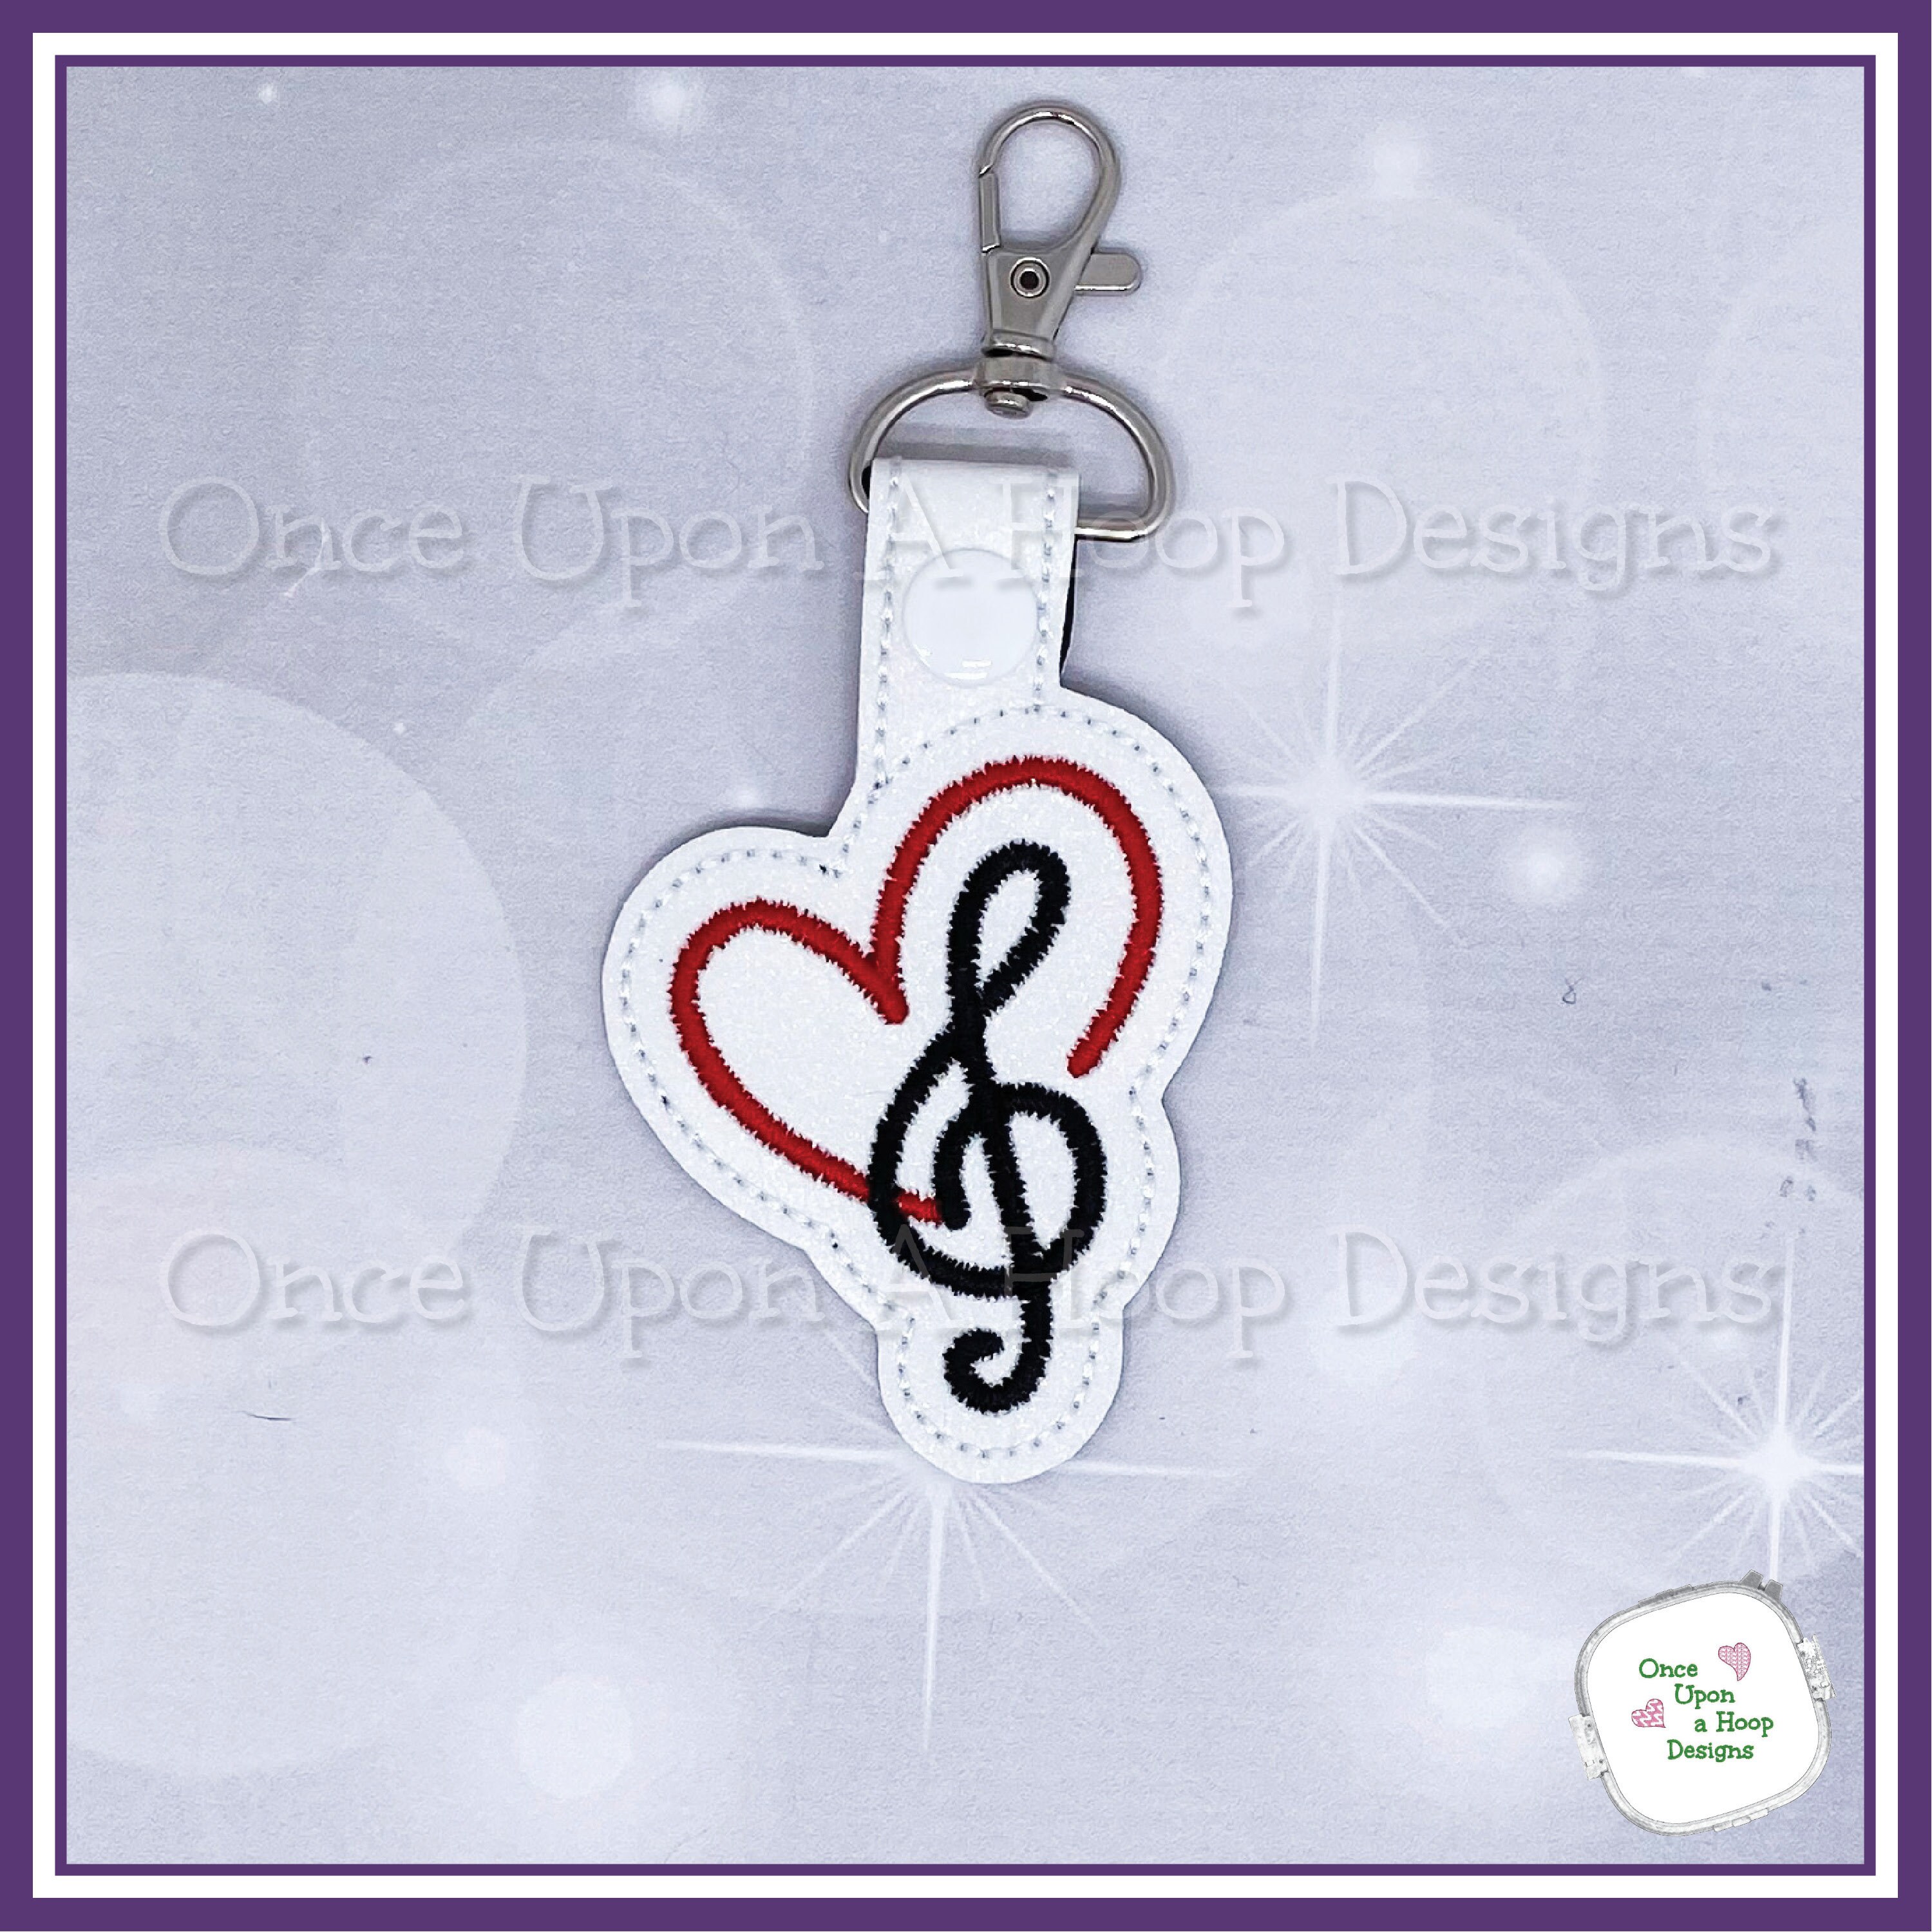 Treble Clef Embroidery Design 5 SIZES G Clef Embroidery Design, Mini  Embroidery Design Tiny Clef Embroidery Music Embroidery Pes Dst 